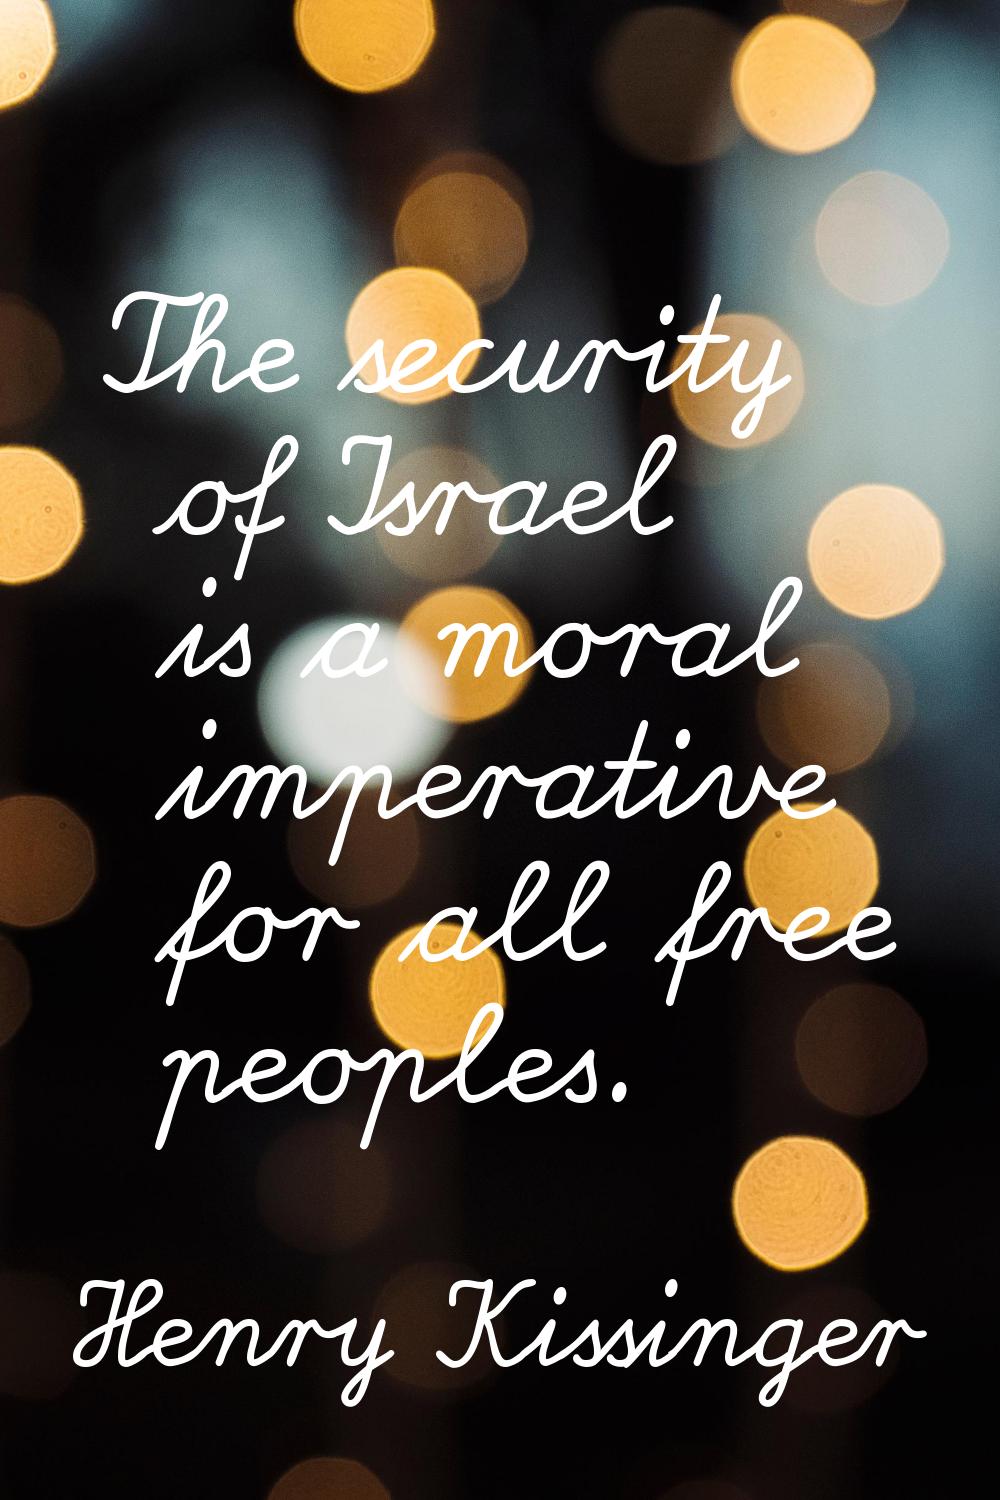 The security of Israel is a moral imperative for all free peoples.